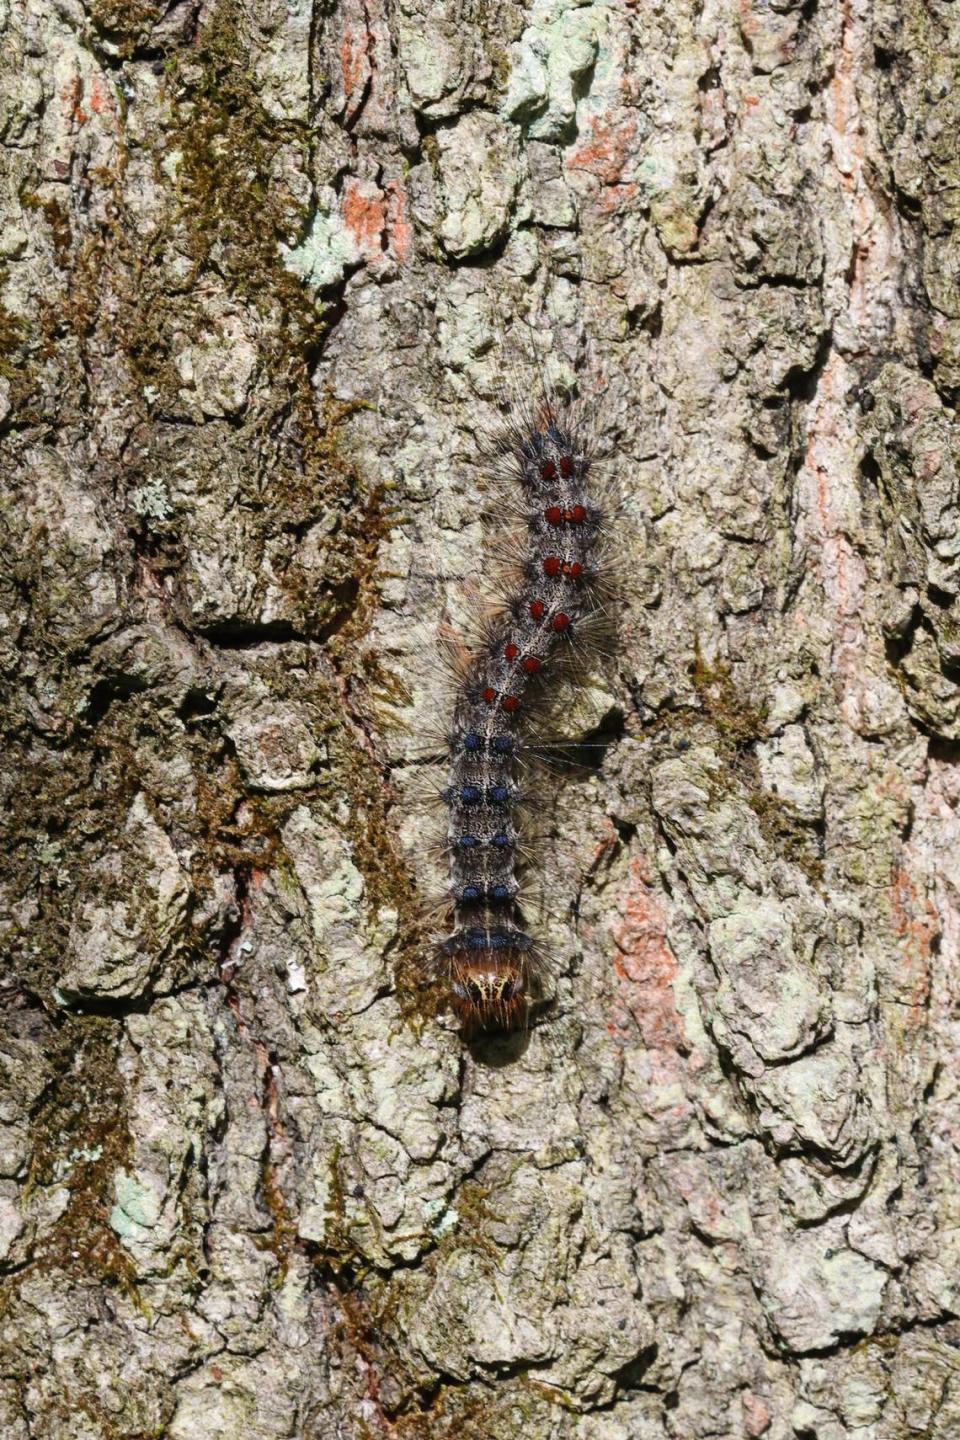 The spongy moth, shown here in its caterpillar state, can defoliate trees while feeding and ultimately weaken and kill them.